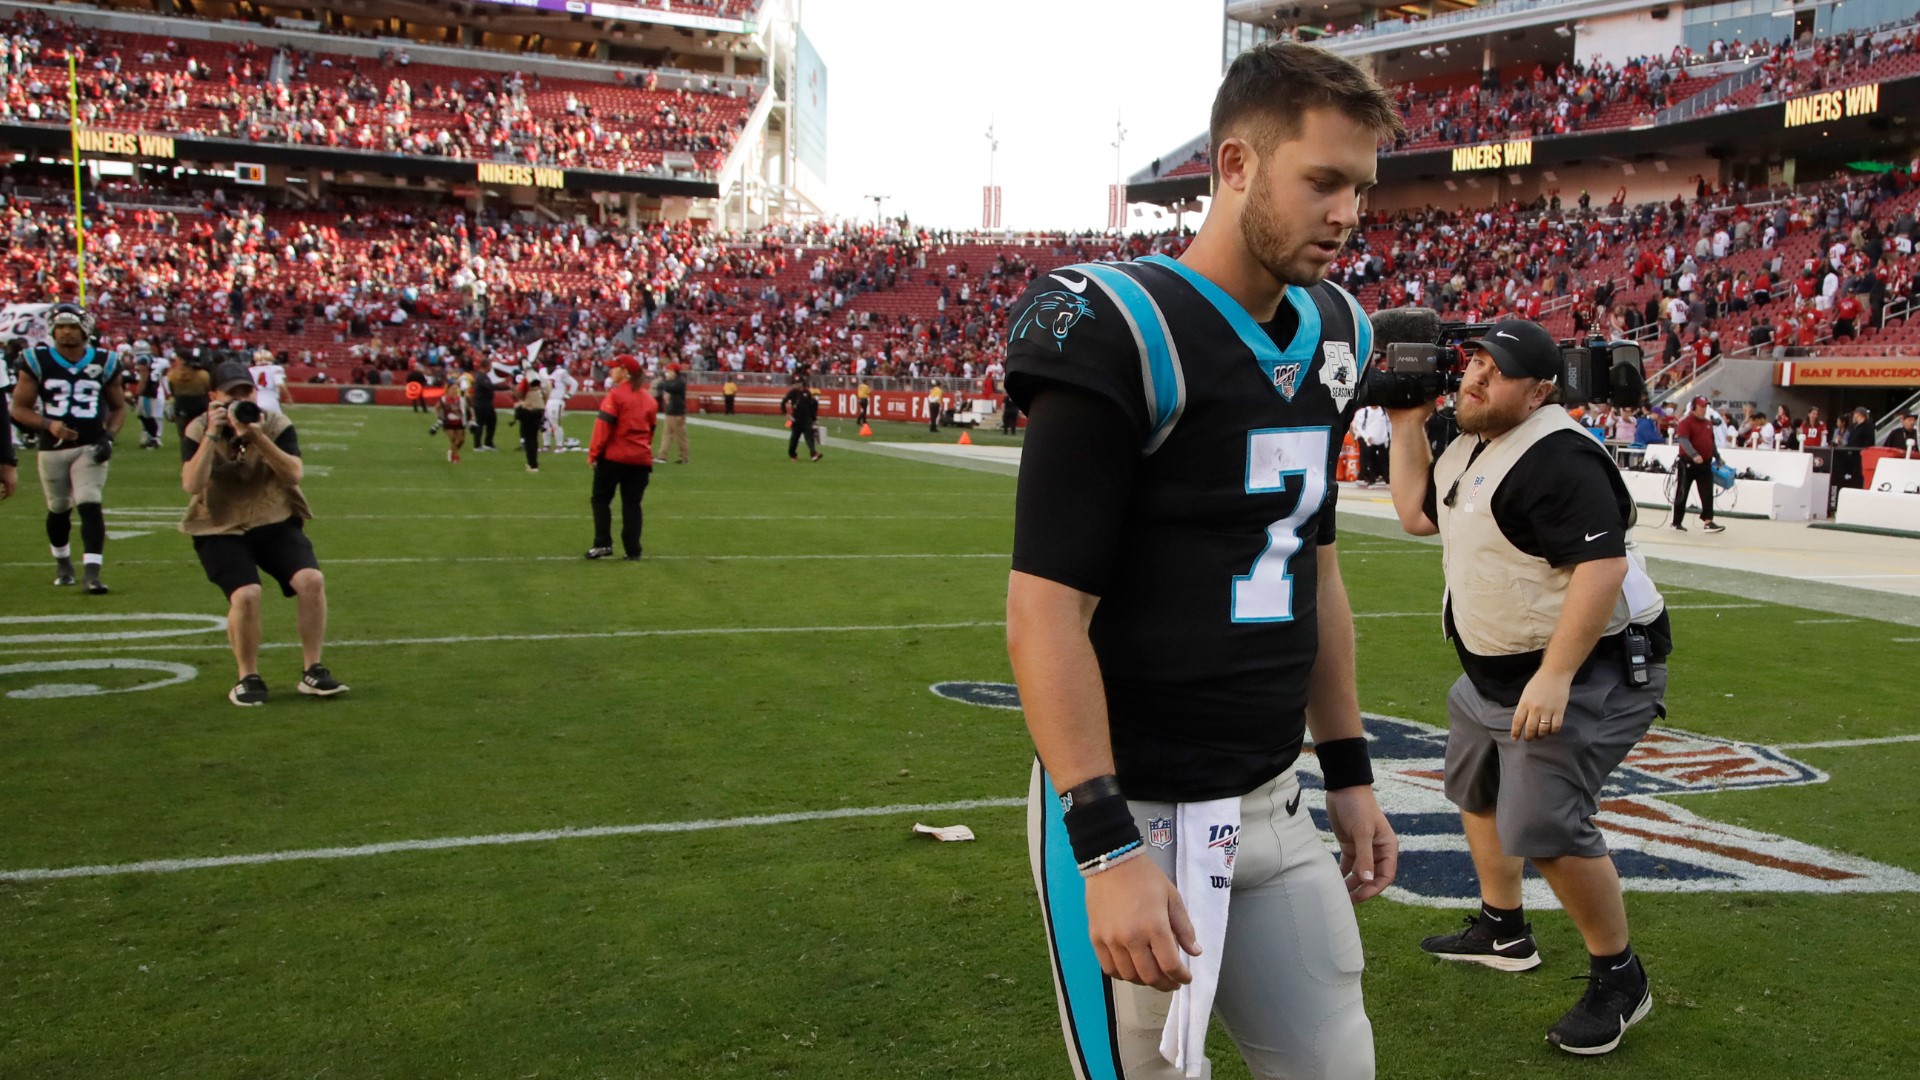 Words alone aren't enough to describe the Panthers' 51-13 loss at San Francisco.